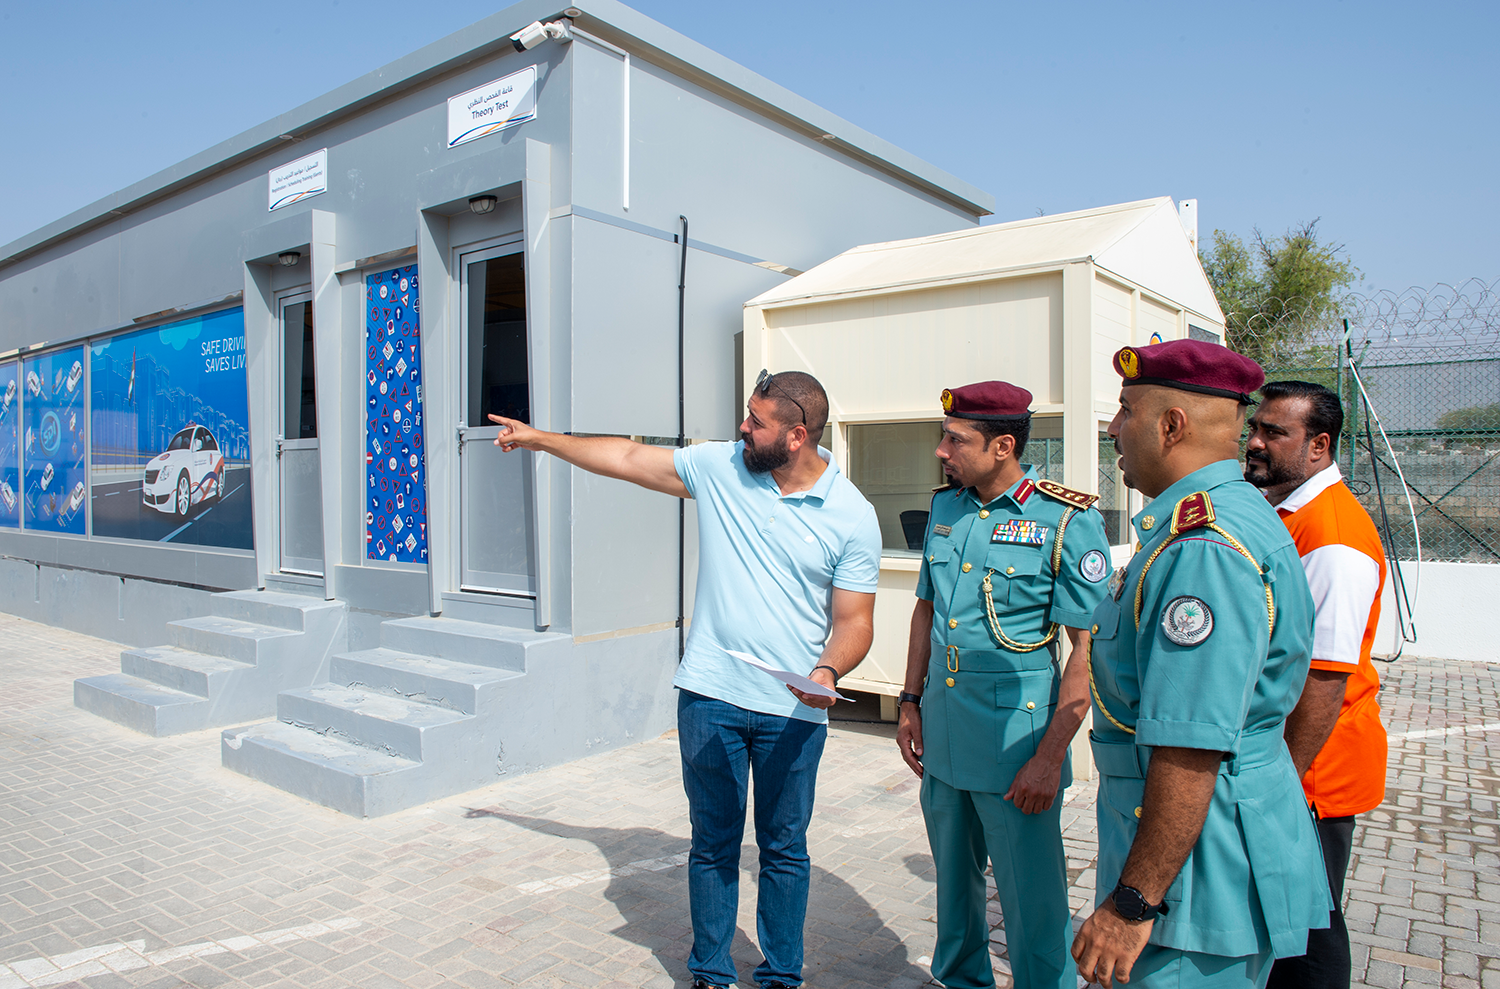 The Eastern Region Police is finalizing the application stages to obtain a license in Dibba Al-Hisn